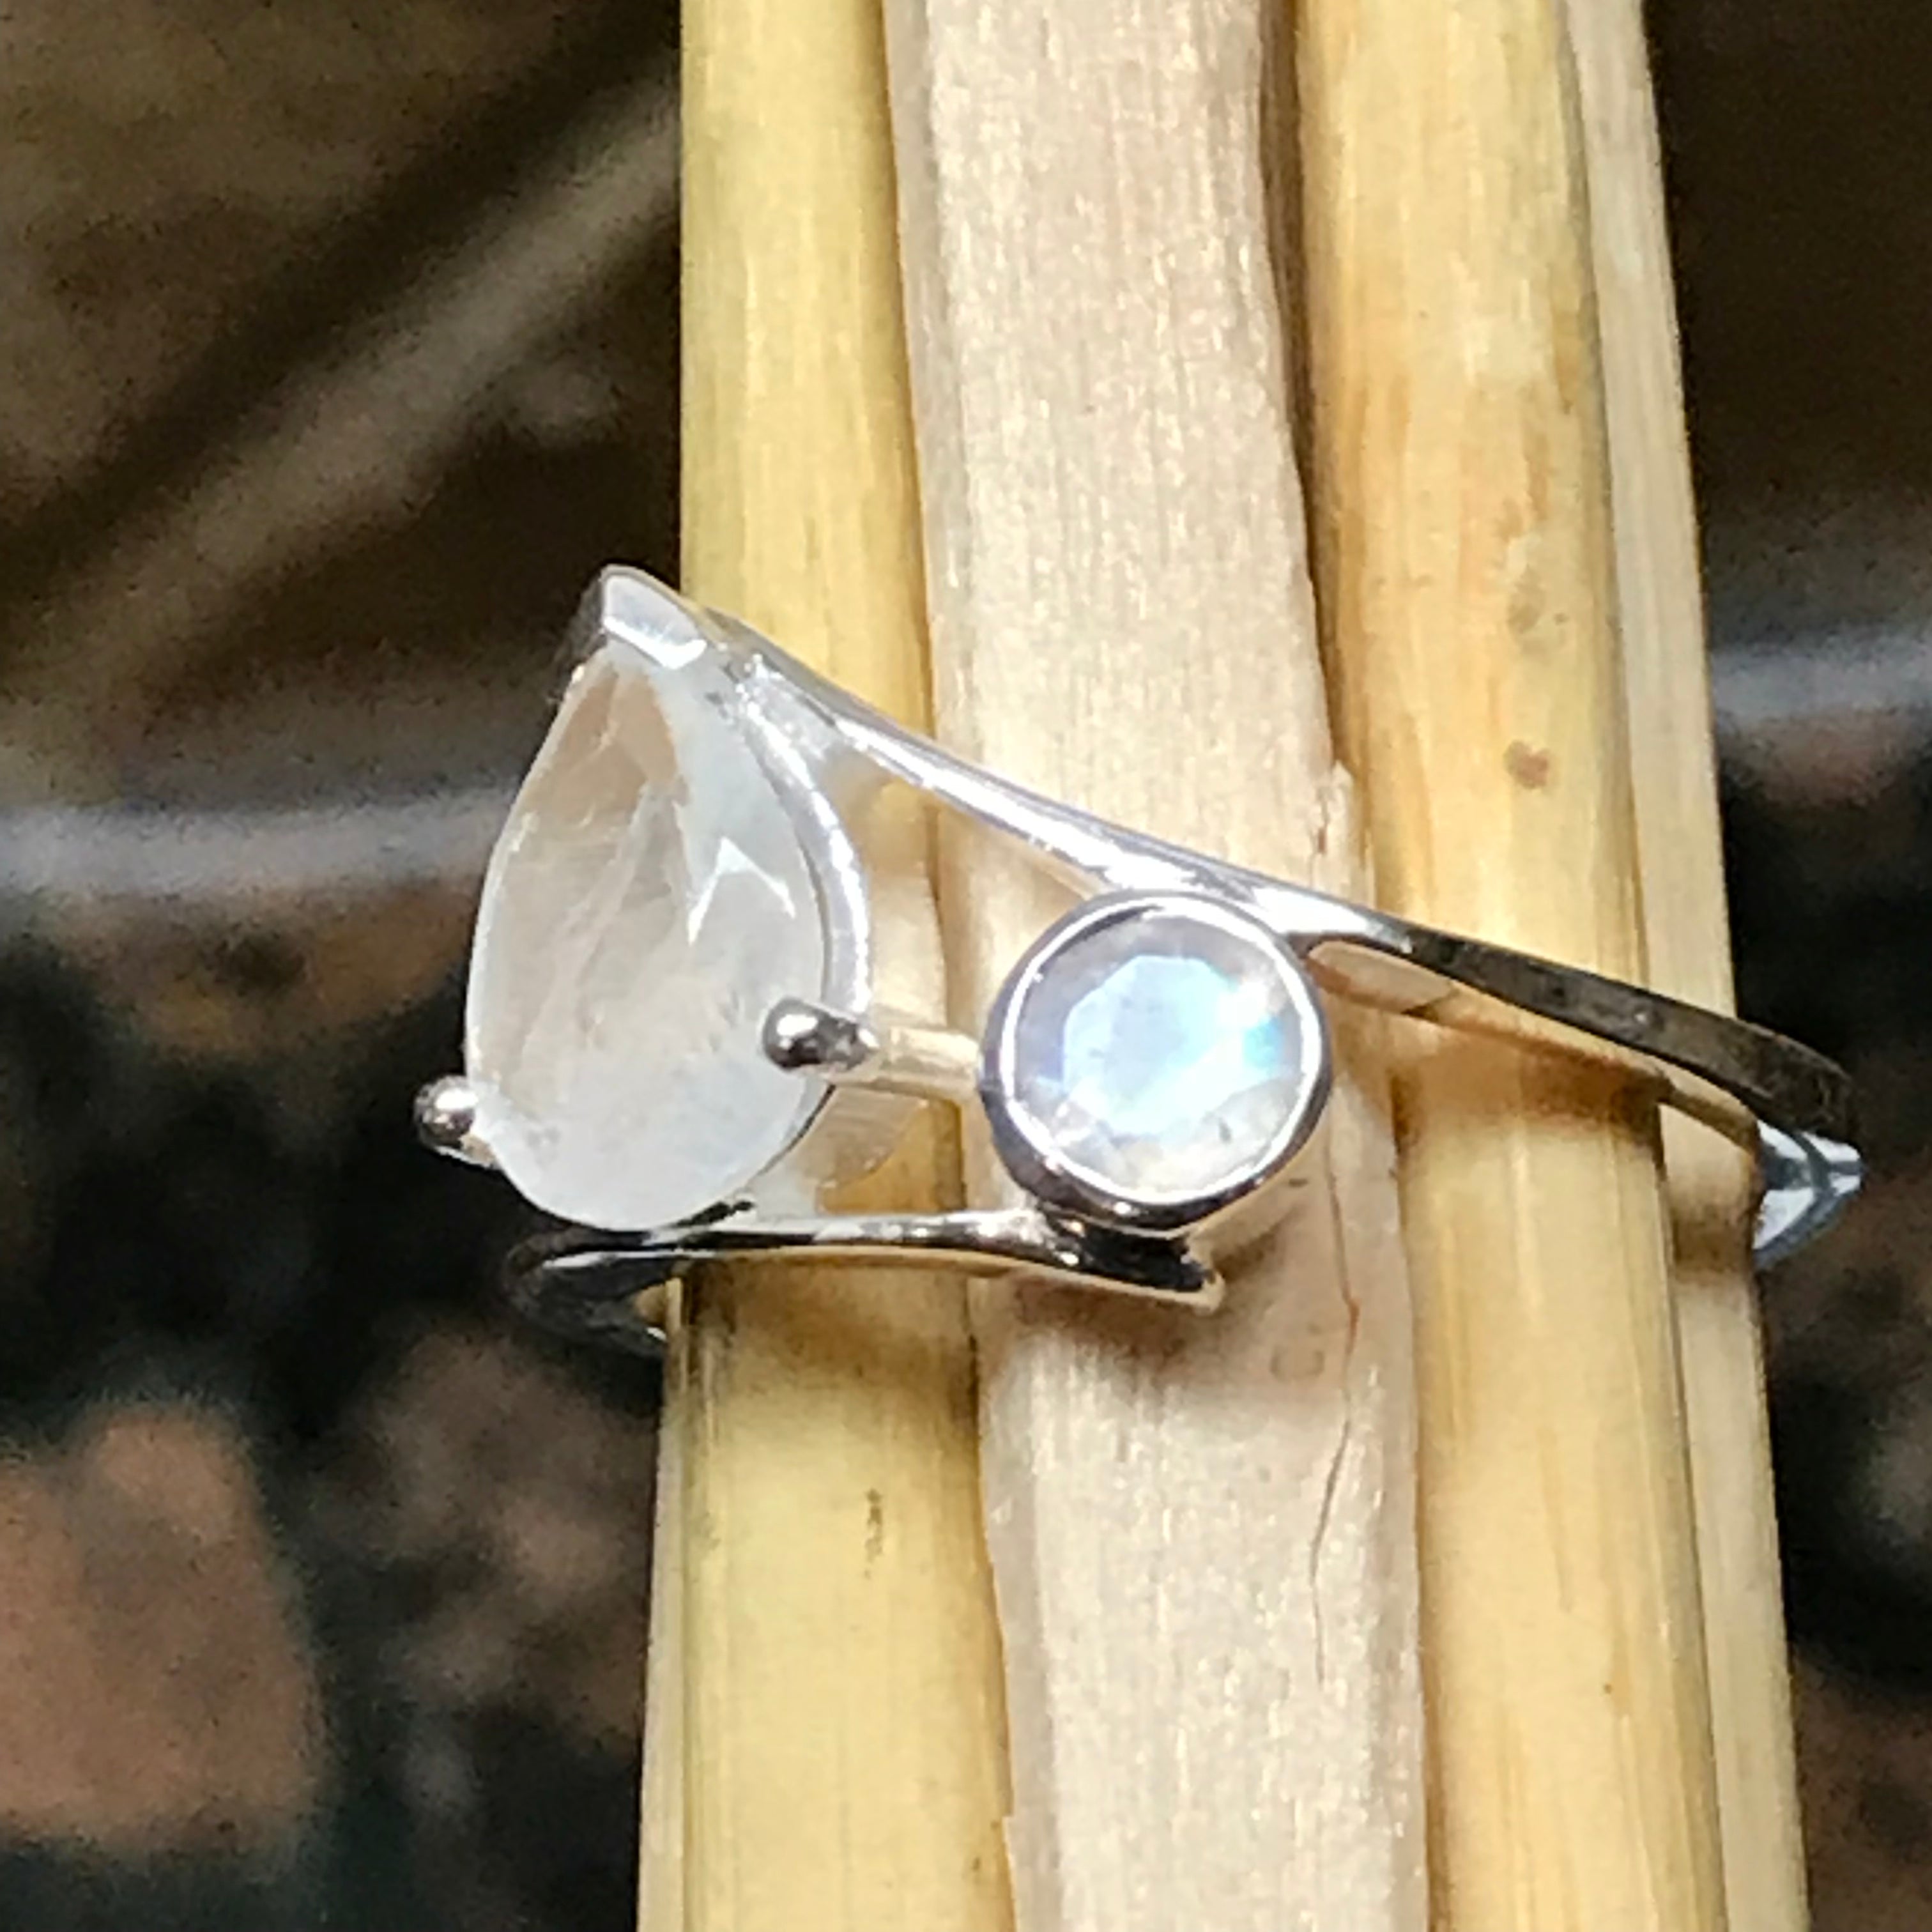 Genuine Rainbow Moonstone 925 Solid Sterling Silver Ring Size 5, 6, 7, 8, 9 - Natural Rocks by Kala